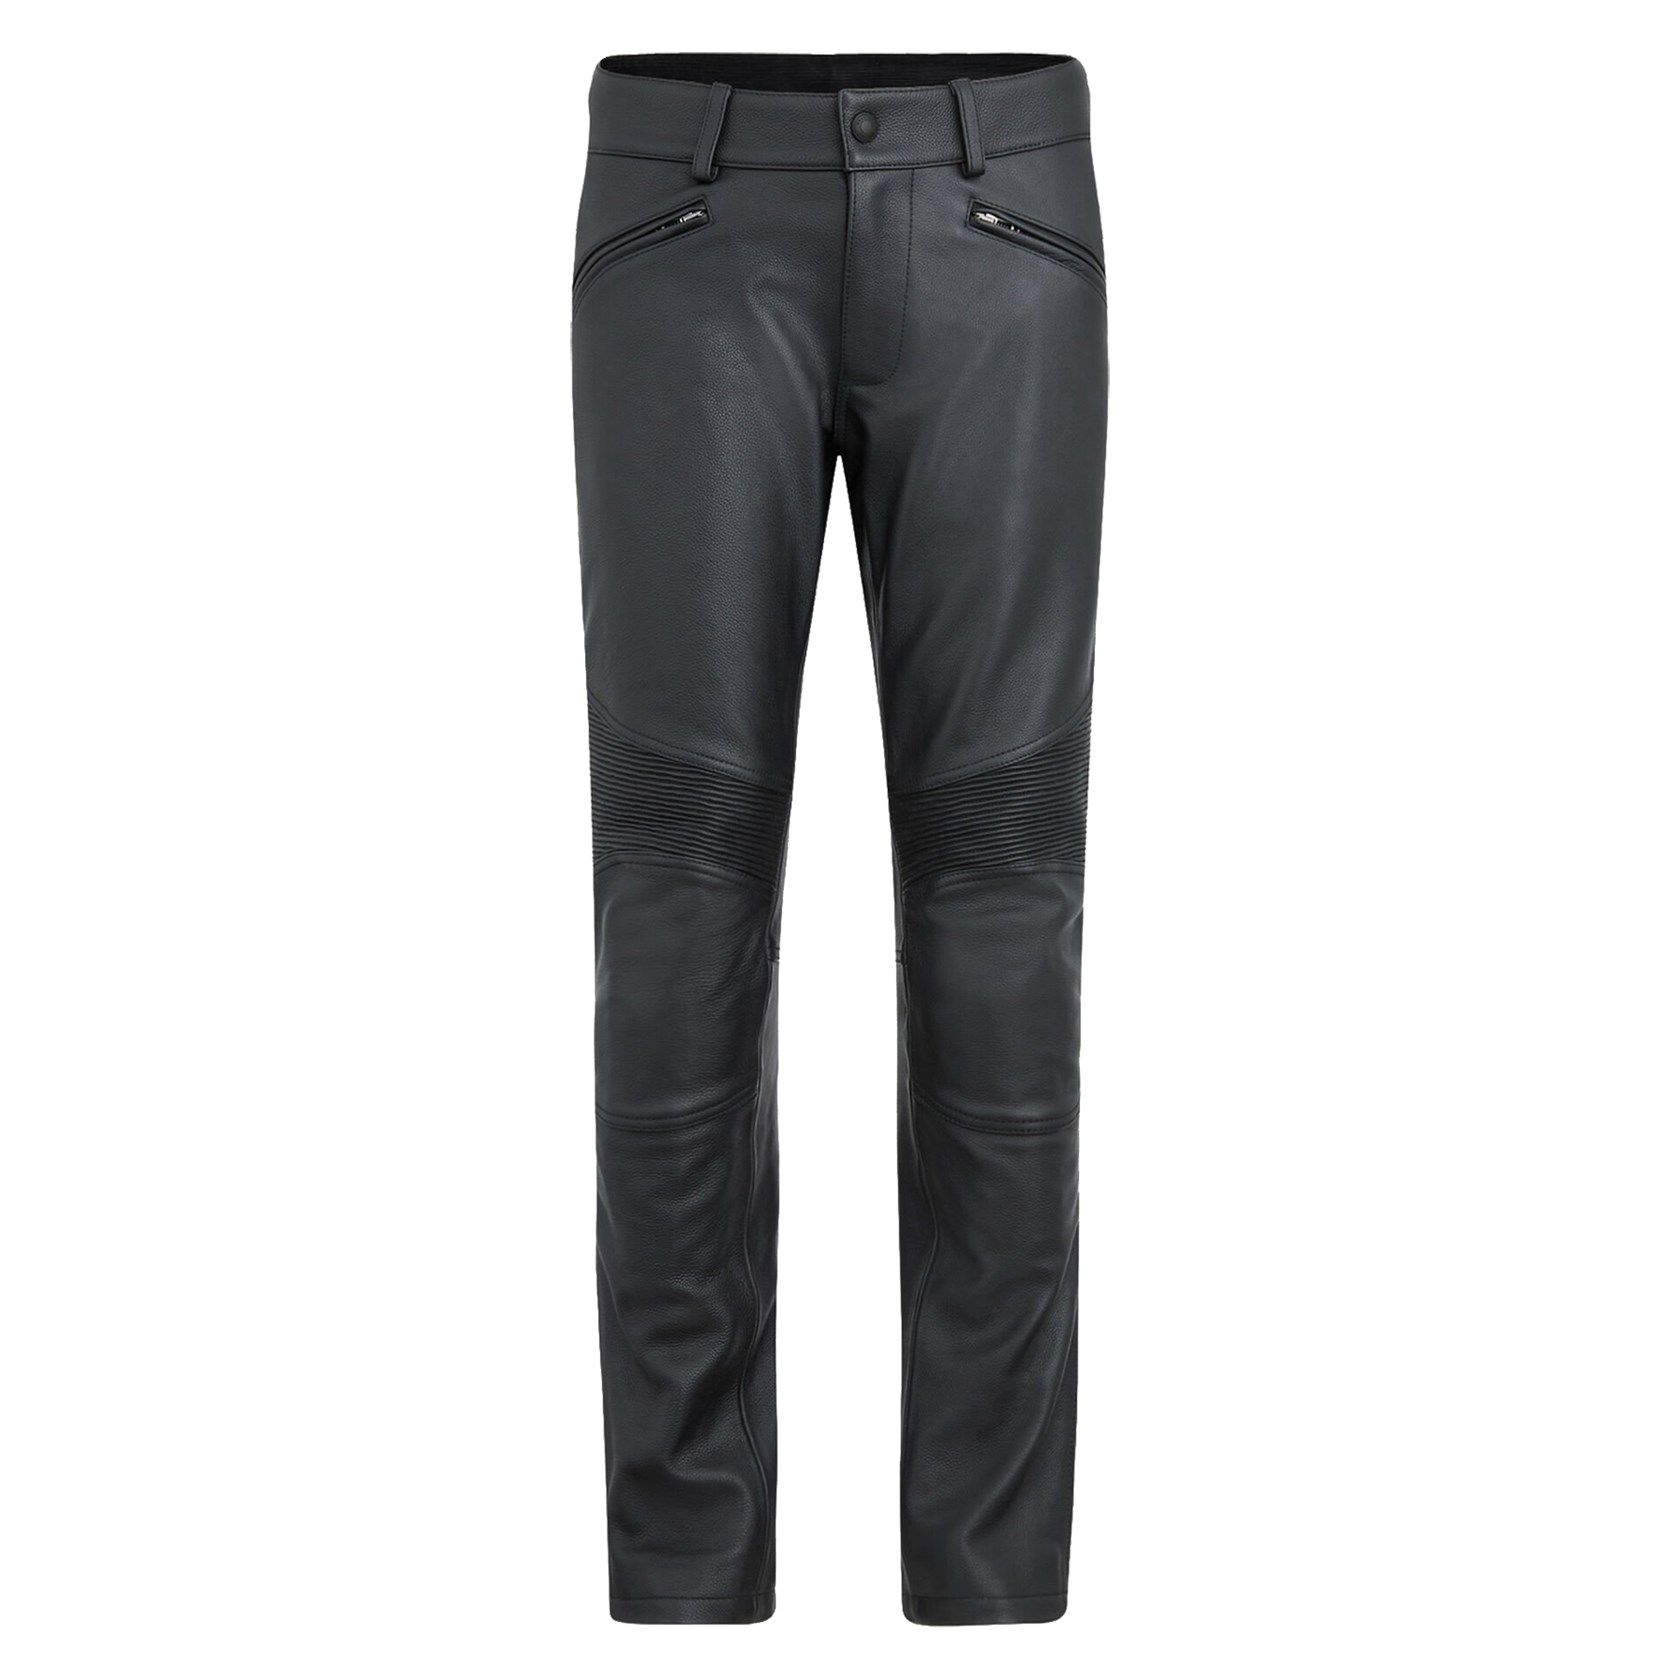 Leather Motorcycle Trousers for sale  eBay